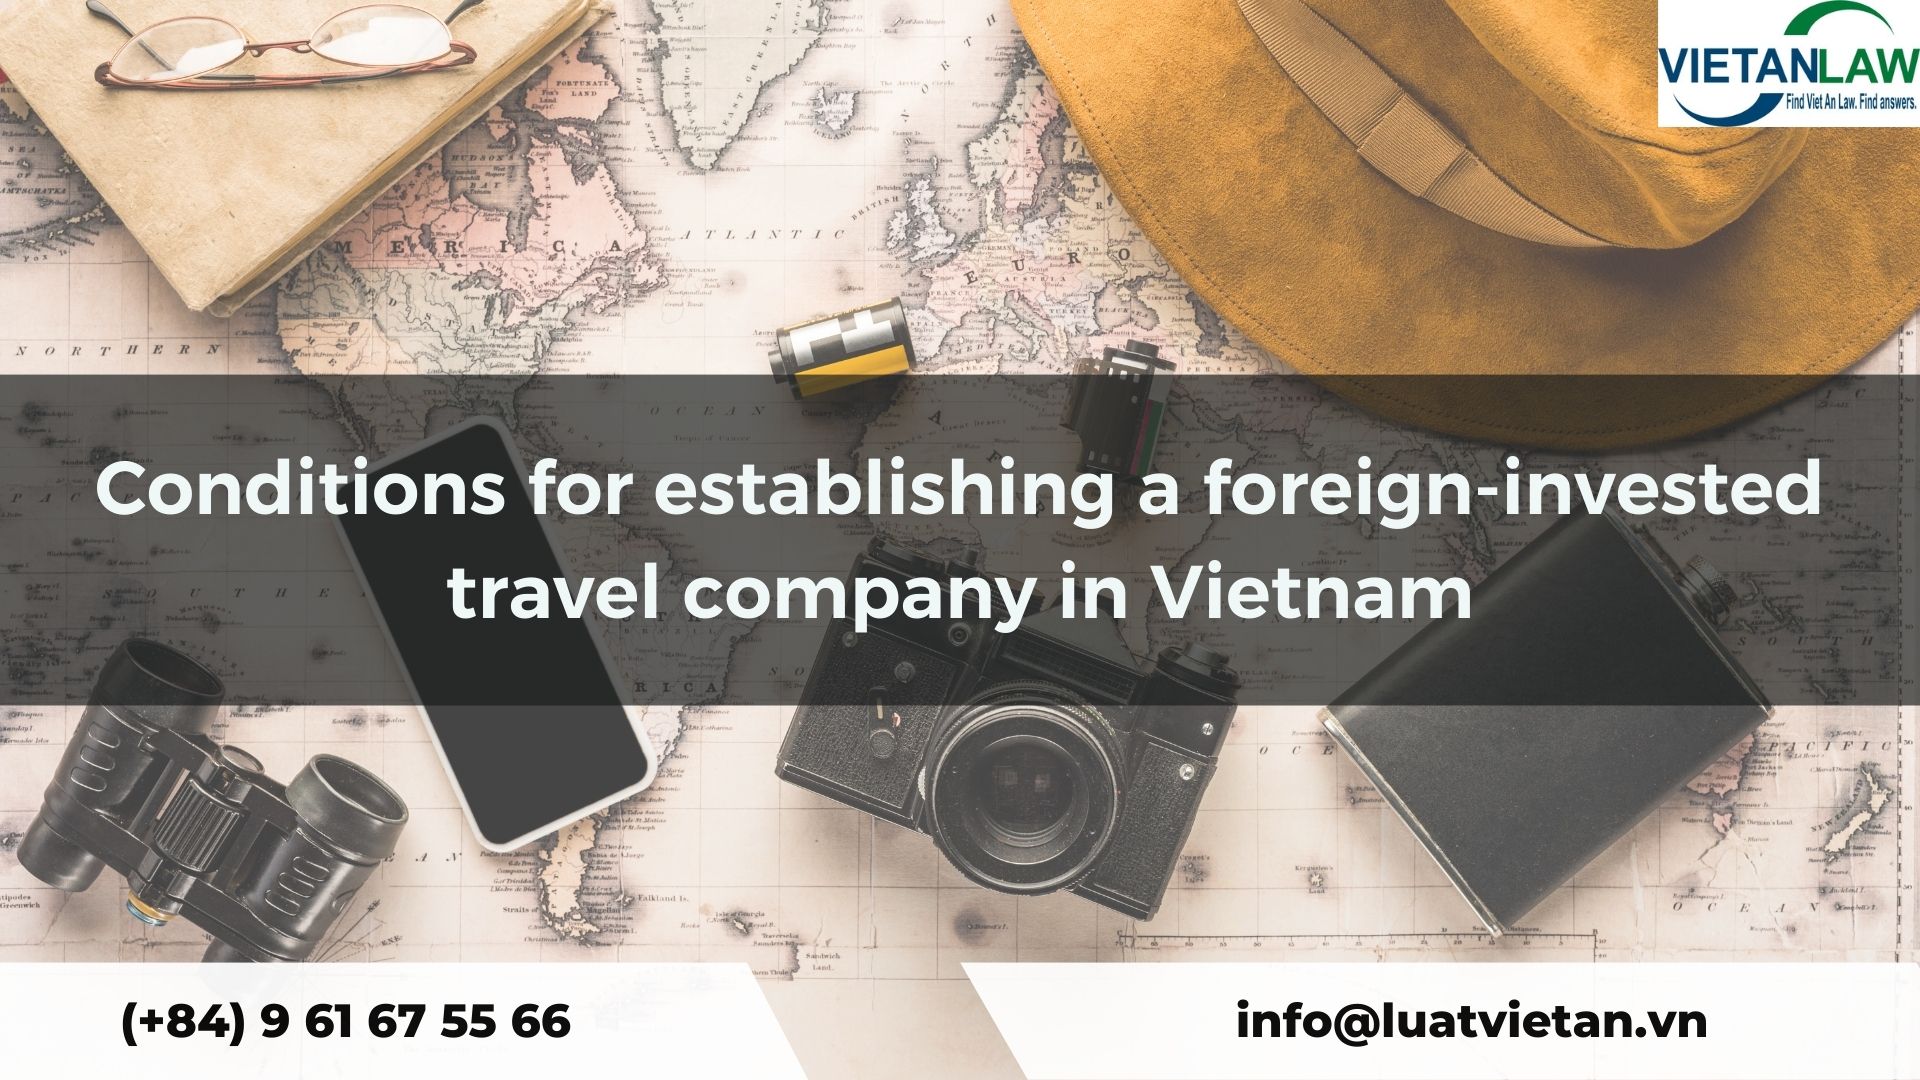 Conditions for establishing a foreign-invested travel company in Vietnam